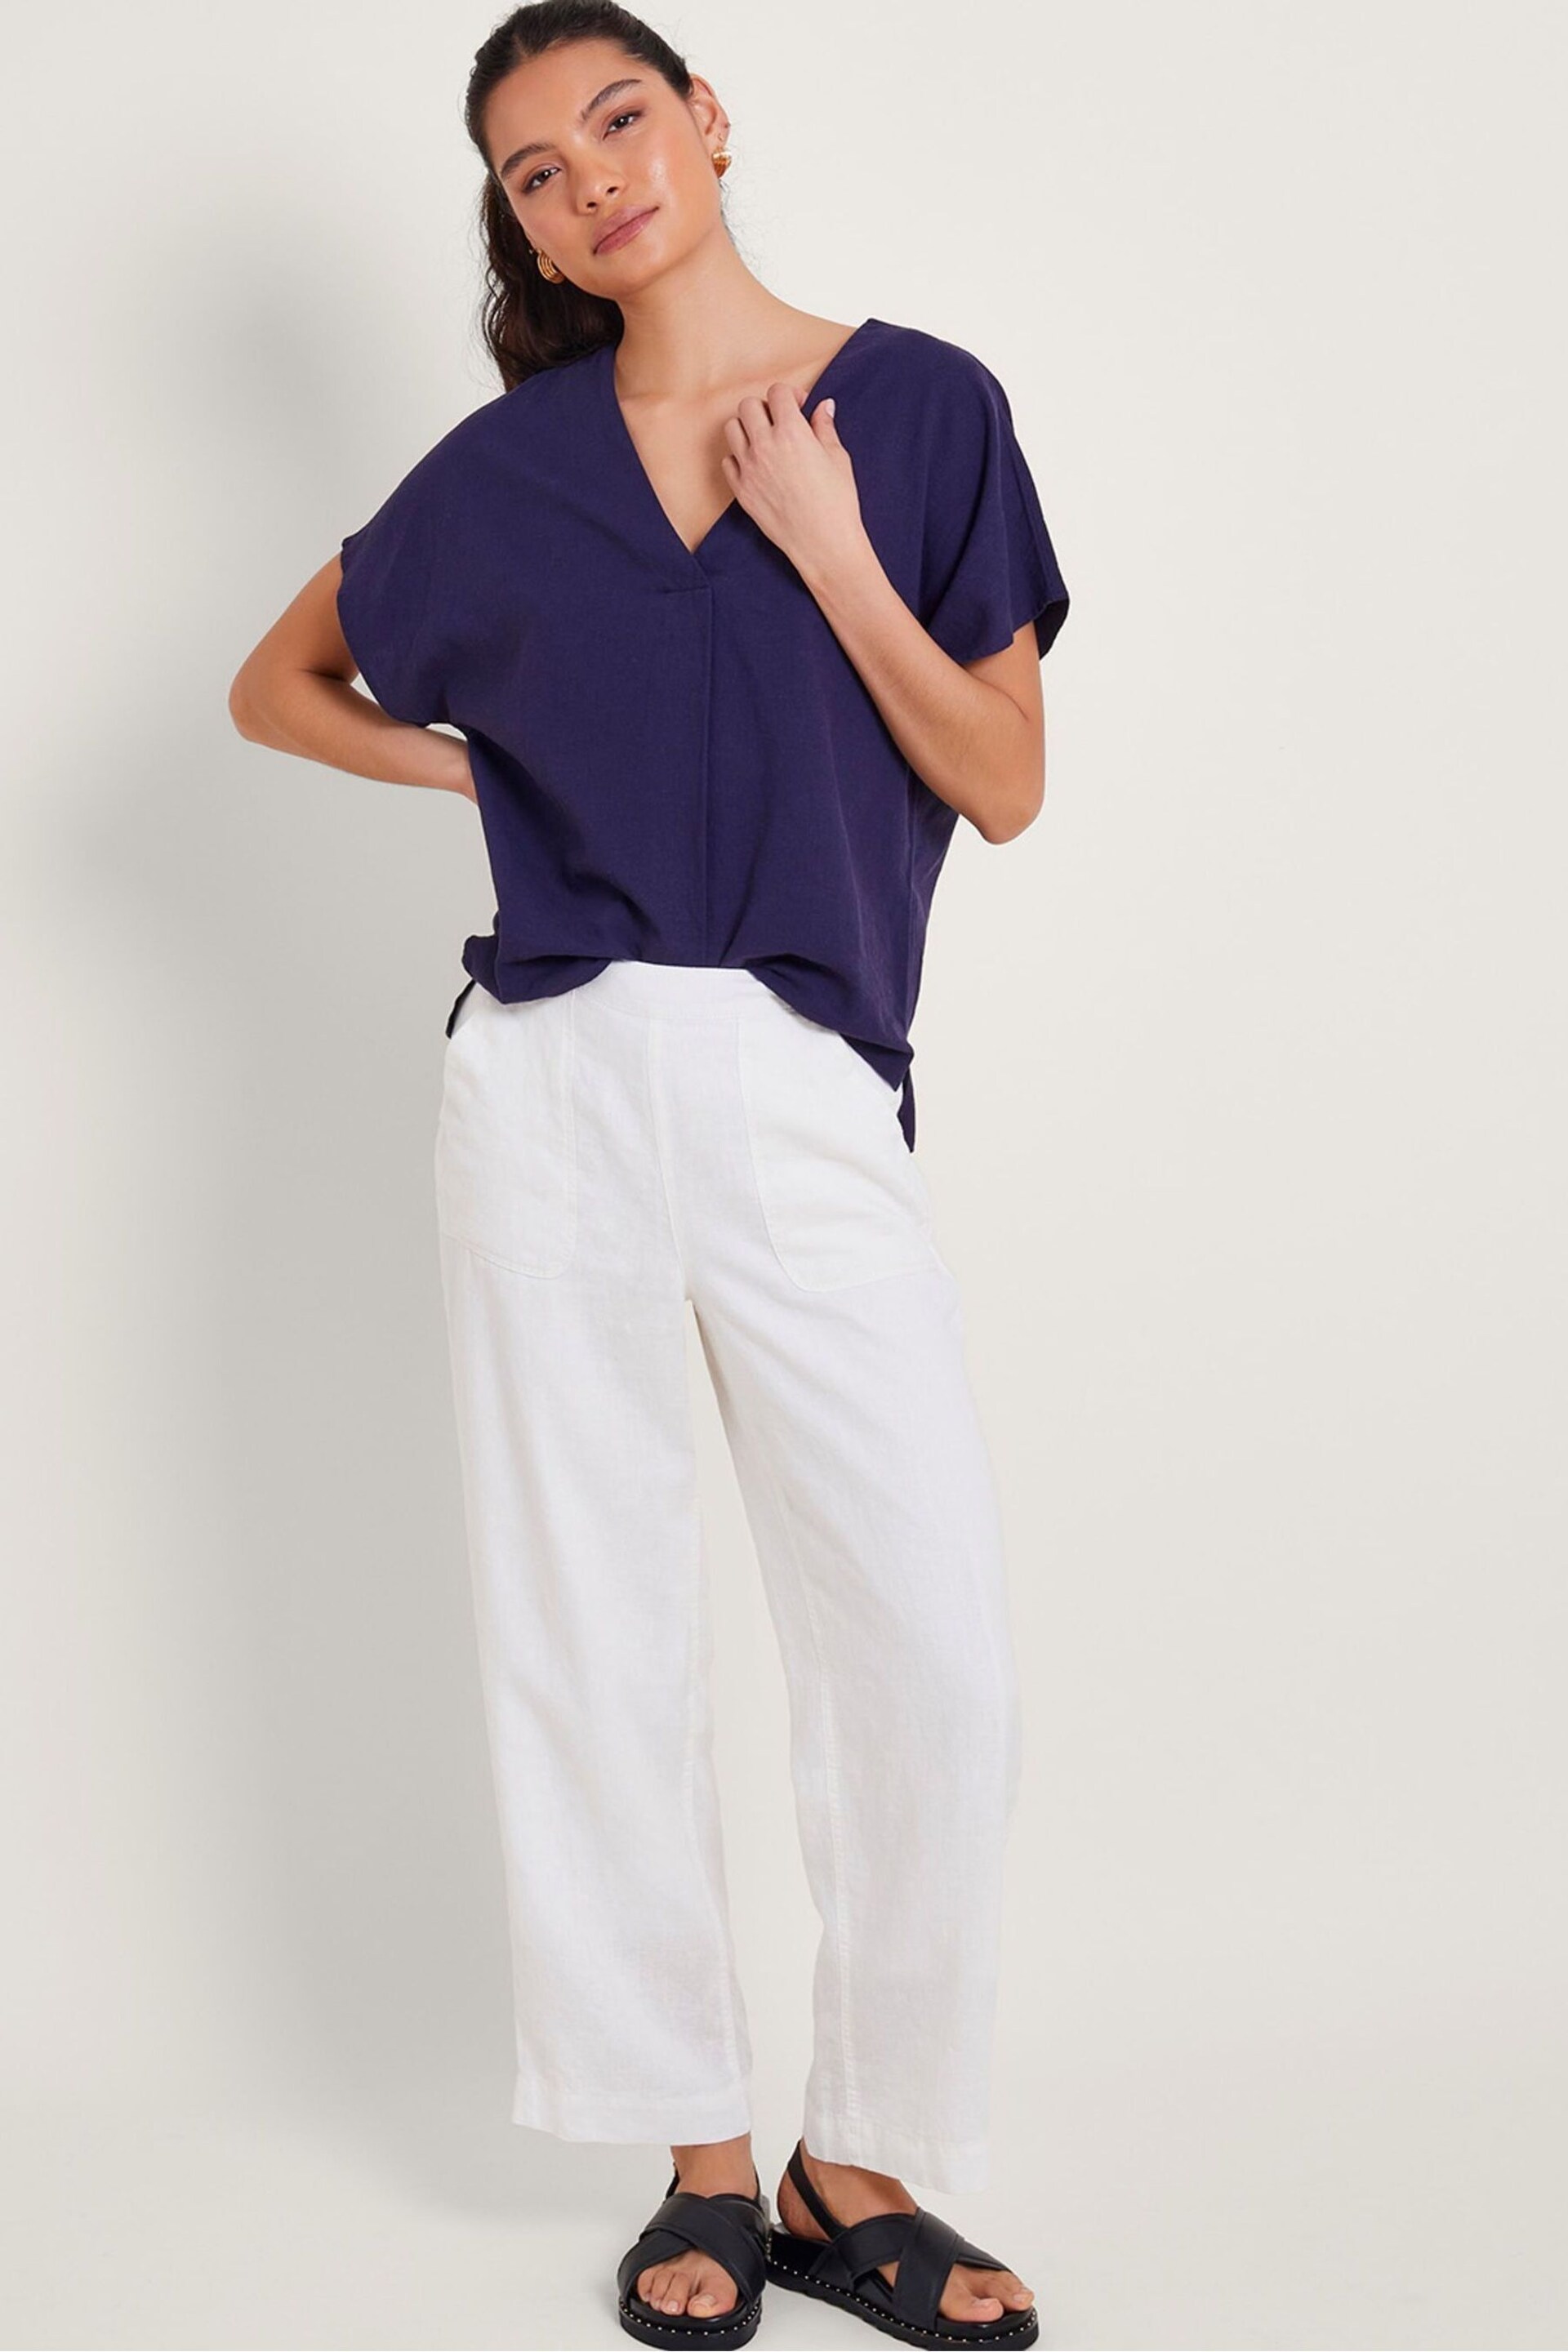 Monsoon White Parker Linen Crop Trousers - Image 1 of 5